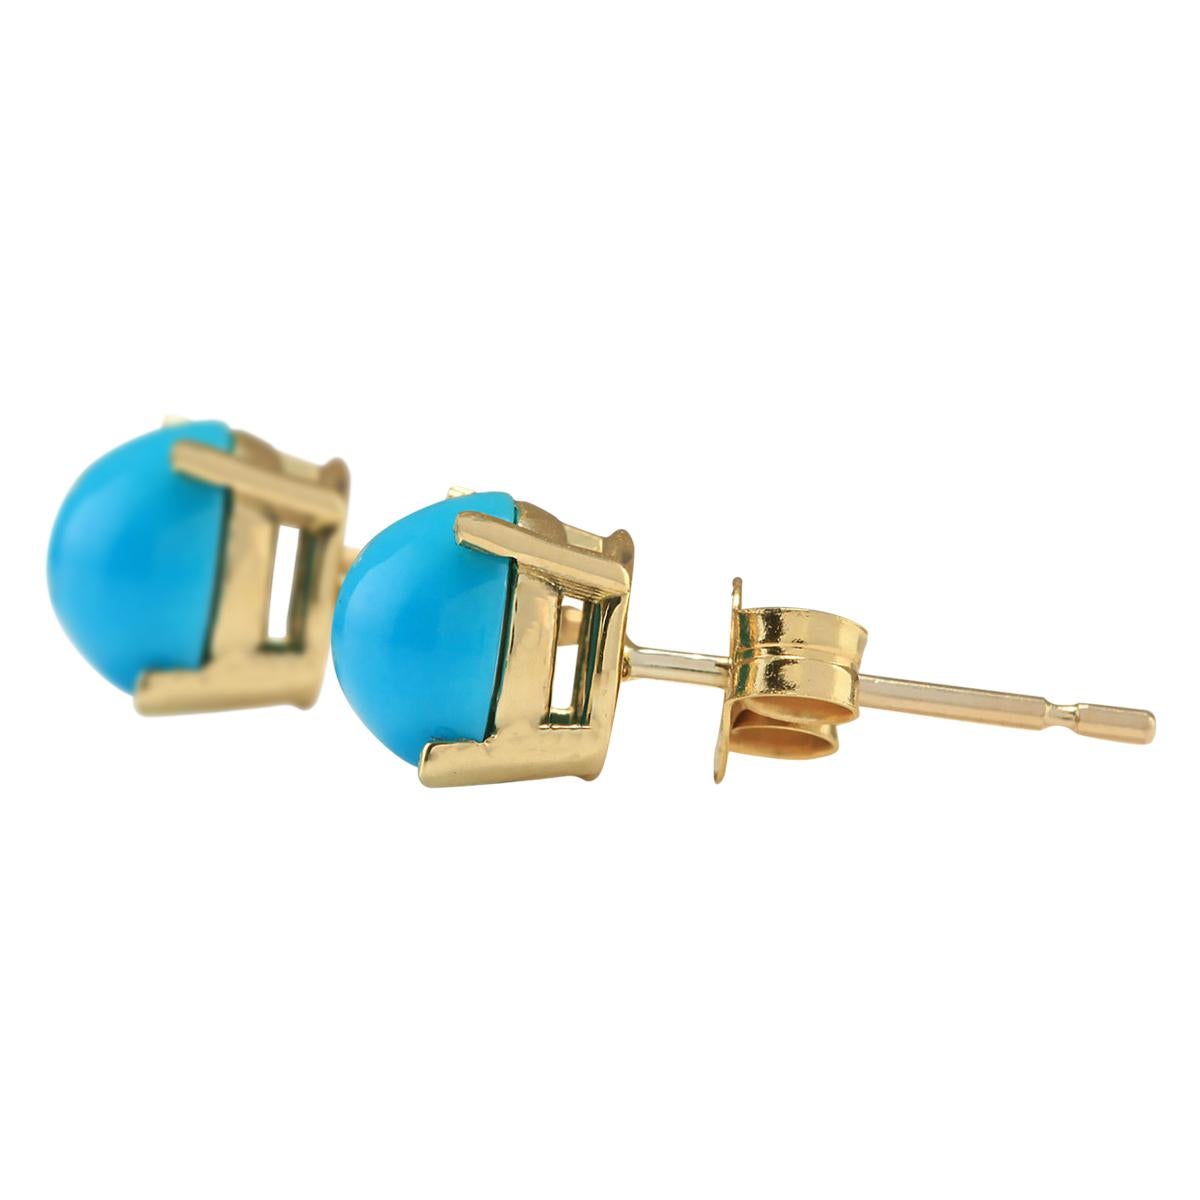 Stamped: 14K Yellow Gold
Total Earrings Weight: 1.2 Grams
Total Natural Turquoise Weight is 2.00 Carat
Color: Blue
Face Measures: 6.00x6.00 mm
Sku: [703279W]